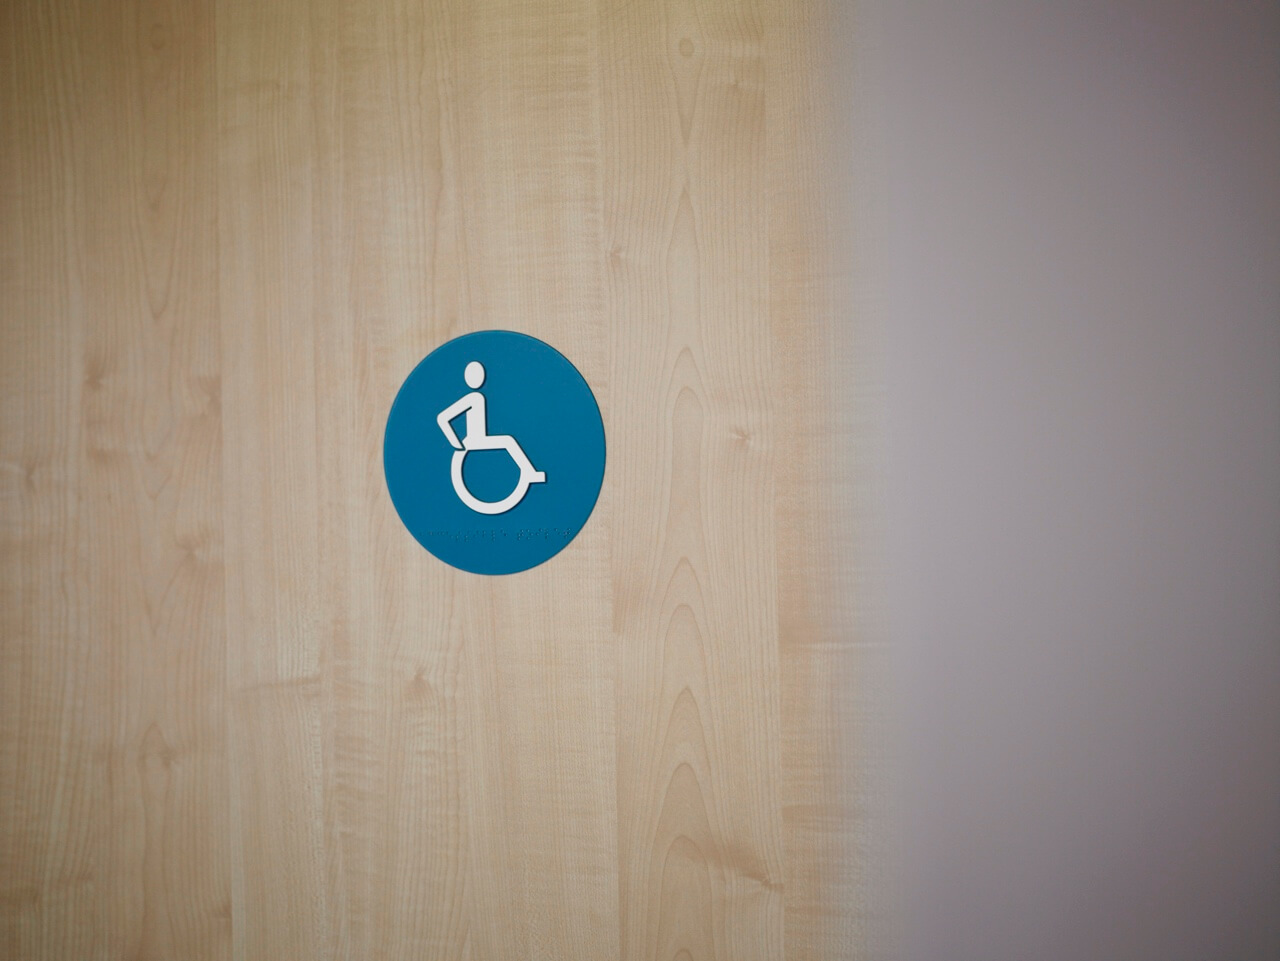 Pictograms at Brandon Primary School indicate accessible toilets